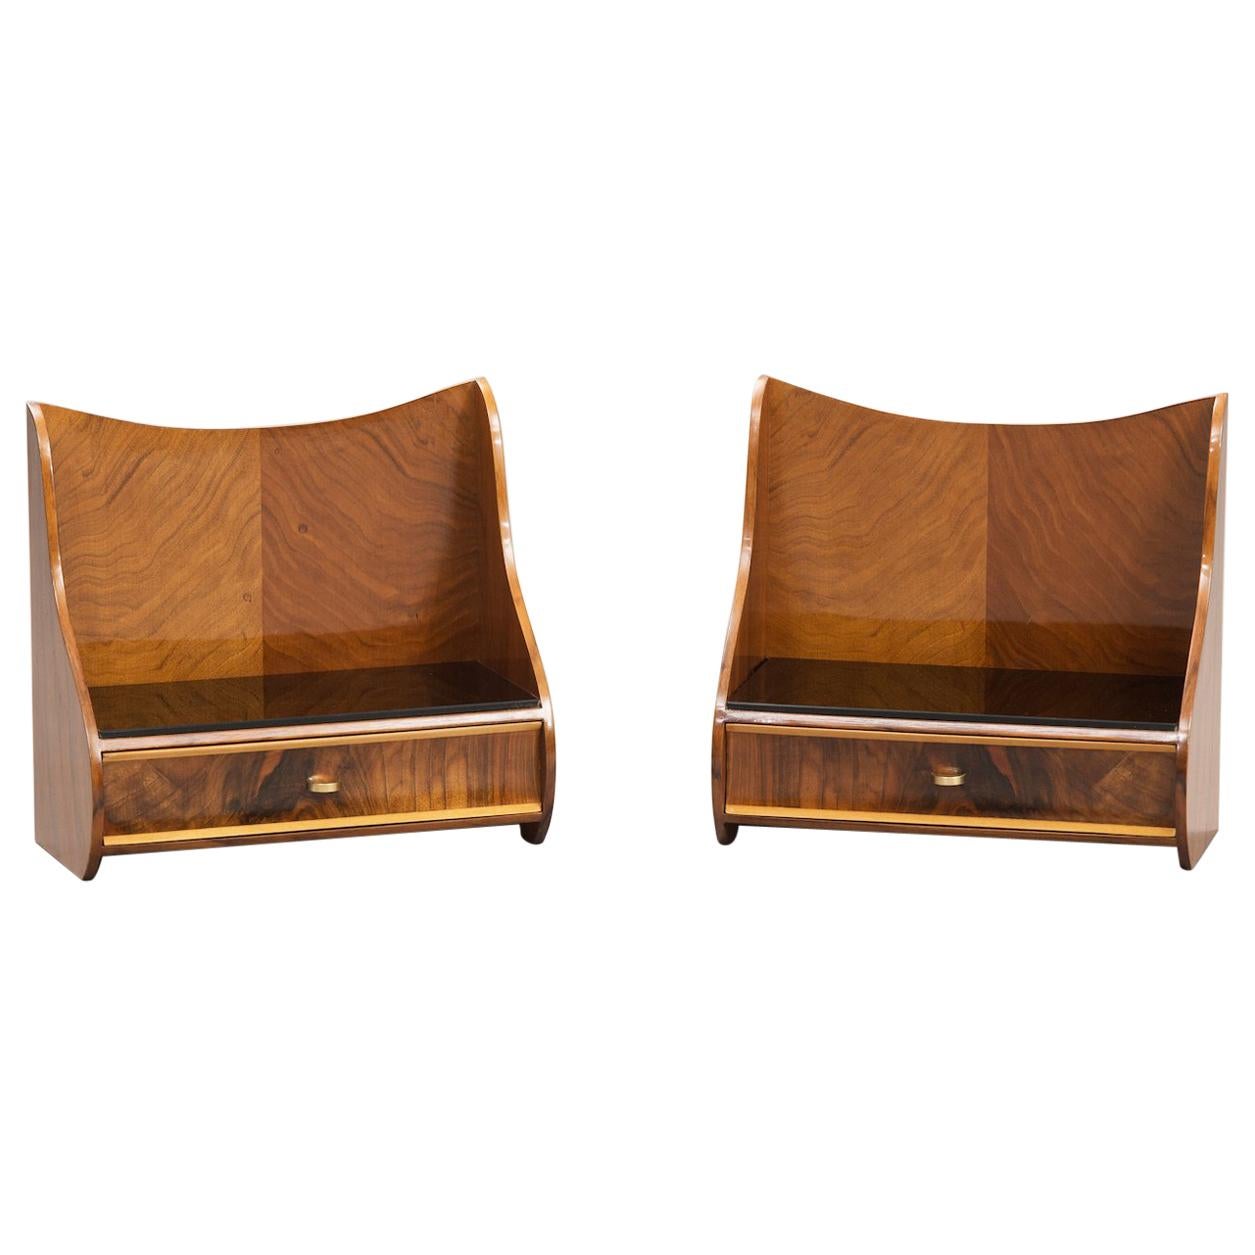 Danish Mid-Century Modern Bedside Tables, One Pair